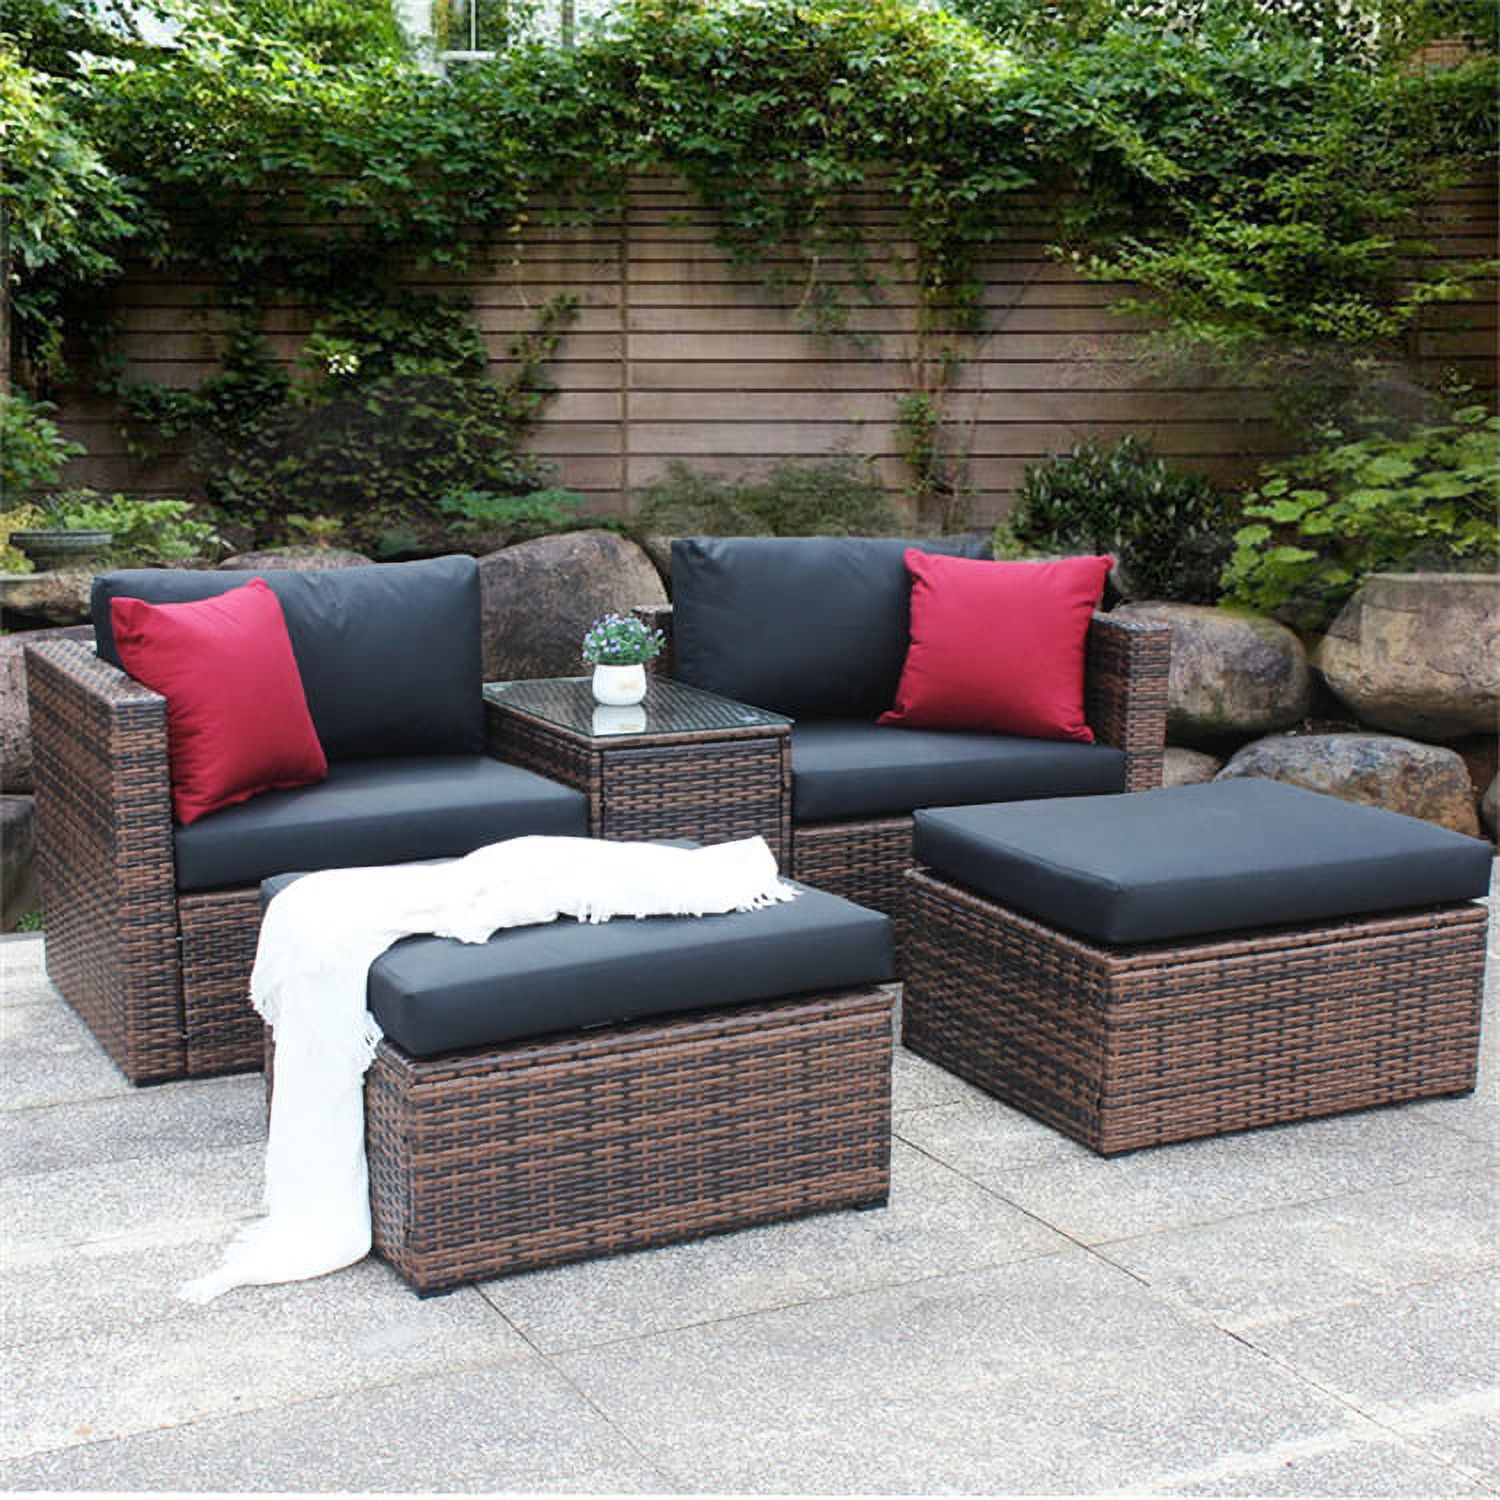 5 Pieces Outdoor Patio Sectional Sofa Set, Rattan and Black Cushion with Weather Protecting Cover, Patio Sofa Sets with 2 Rattan Chairs, 2 Pieces Patio Rattan Ottomans and Coffee Table - image 1 of 7